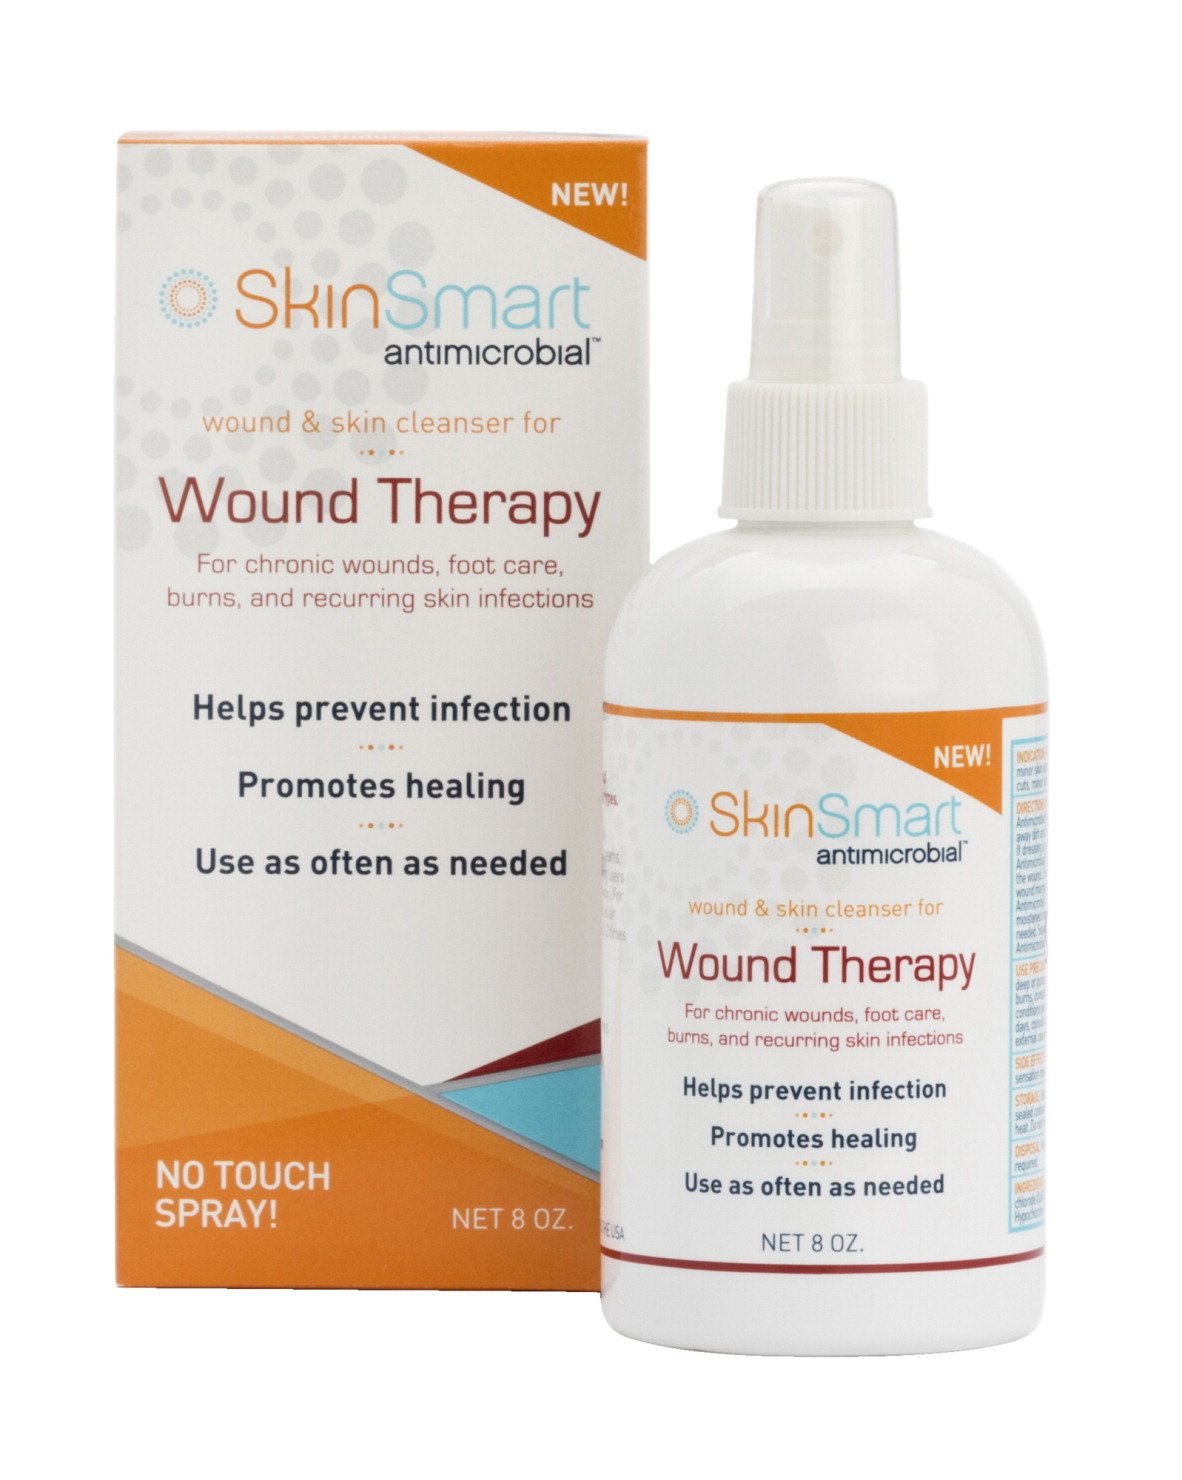 SkinSmart Antimicrobial Wound Therapy